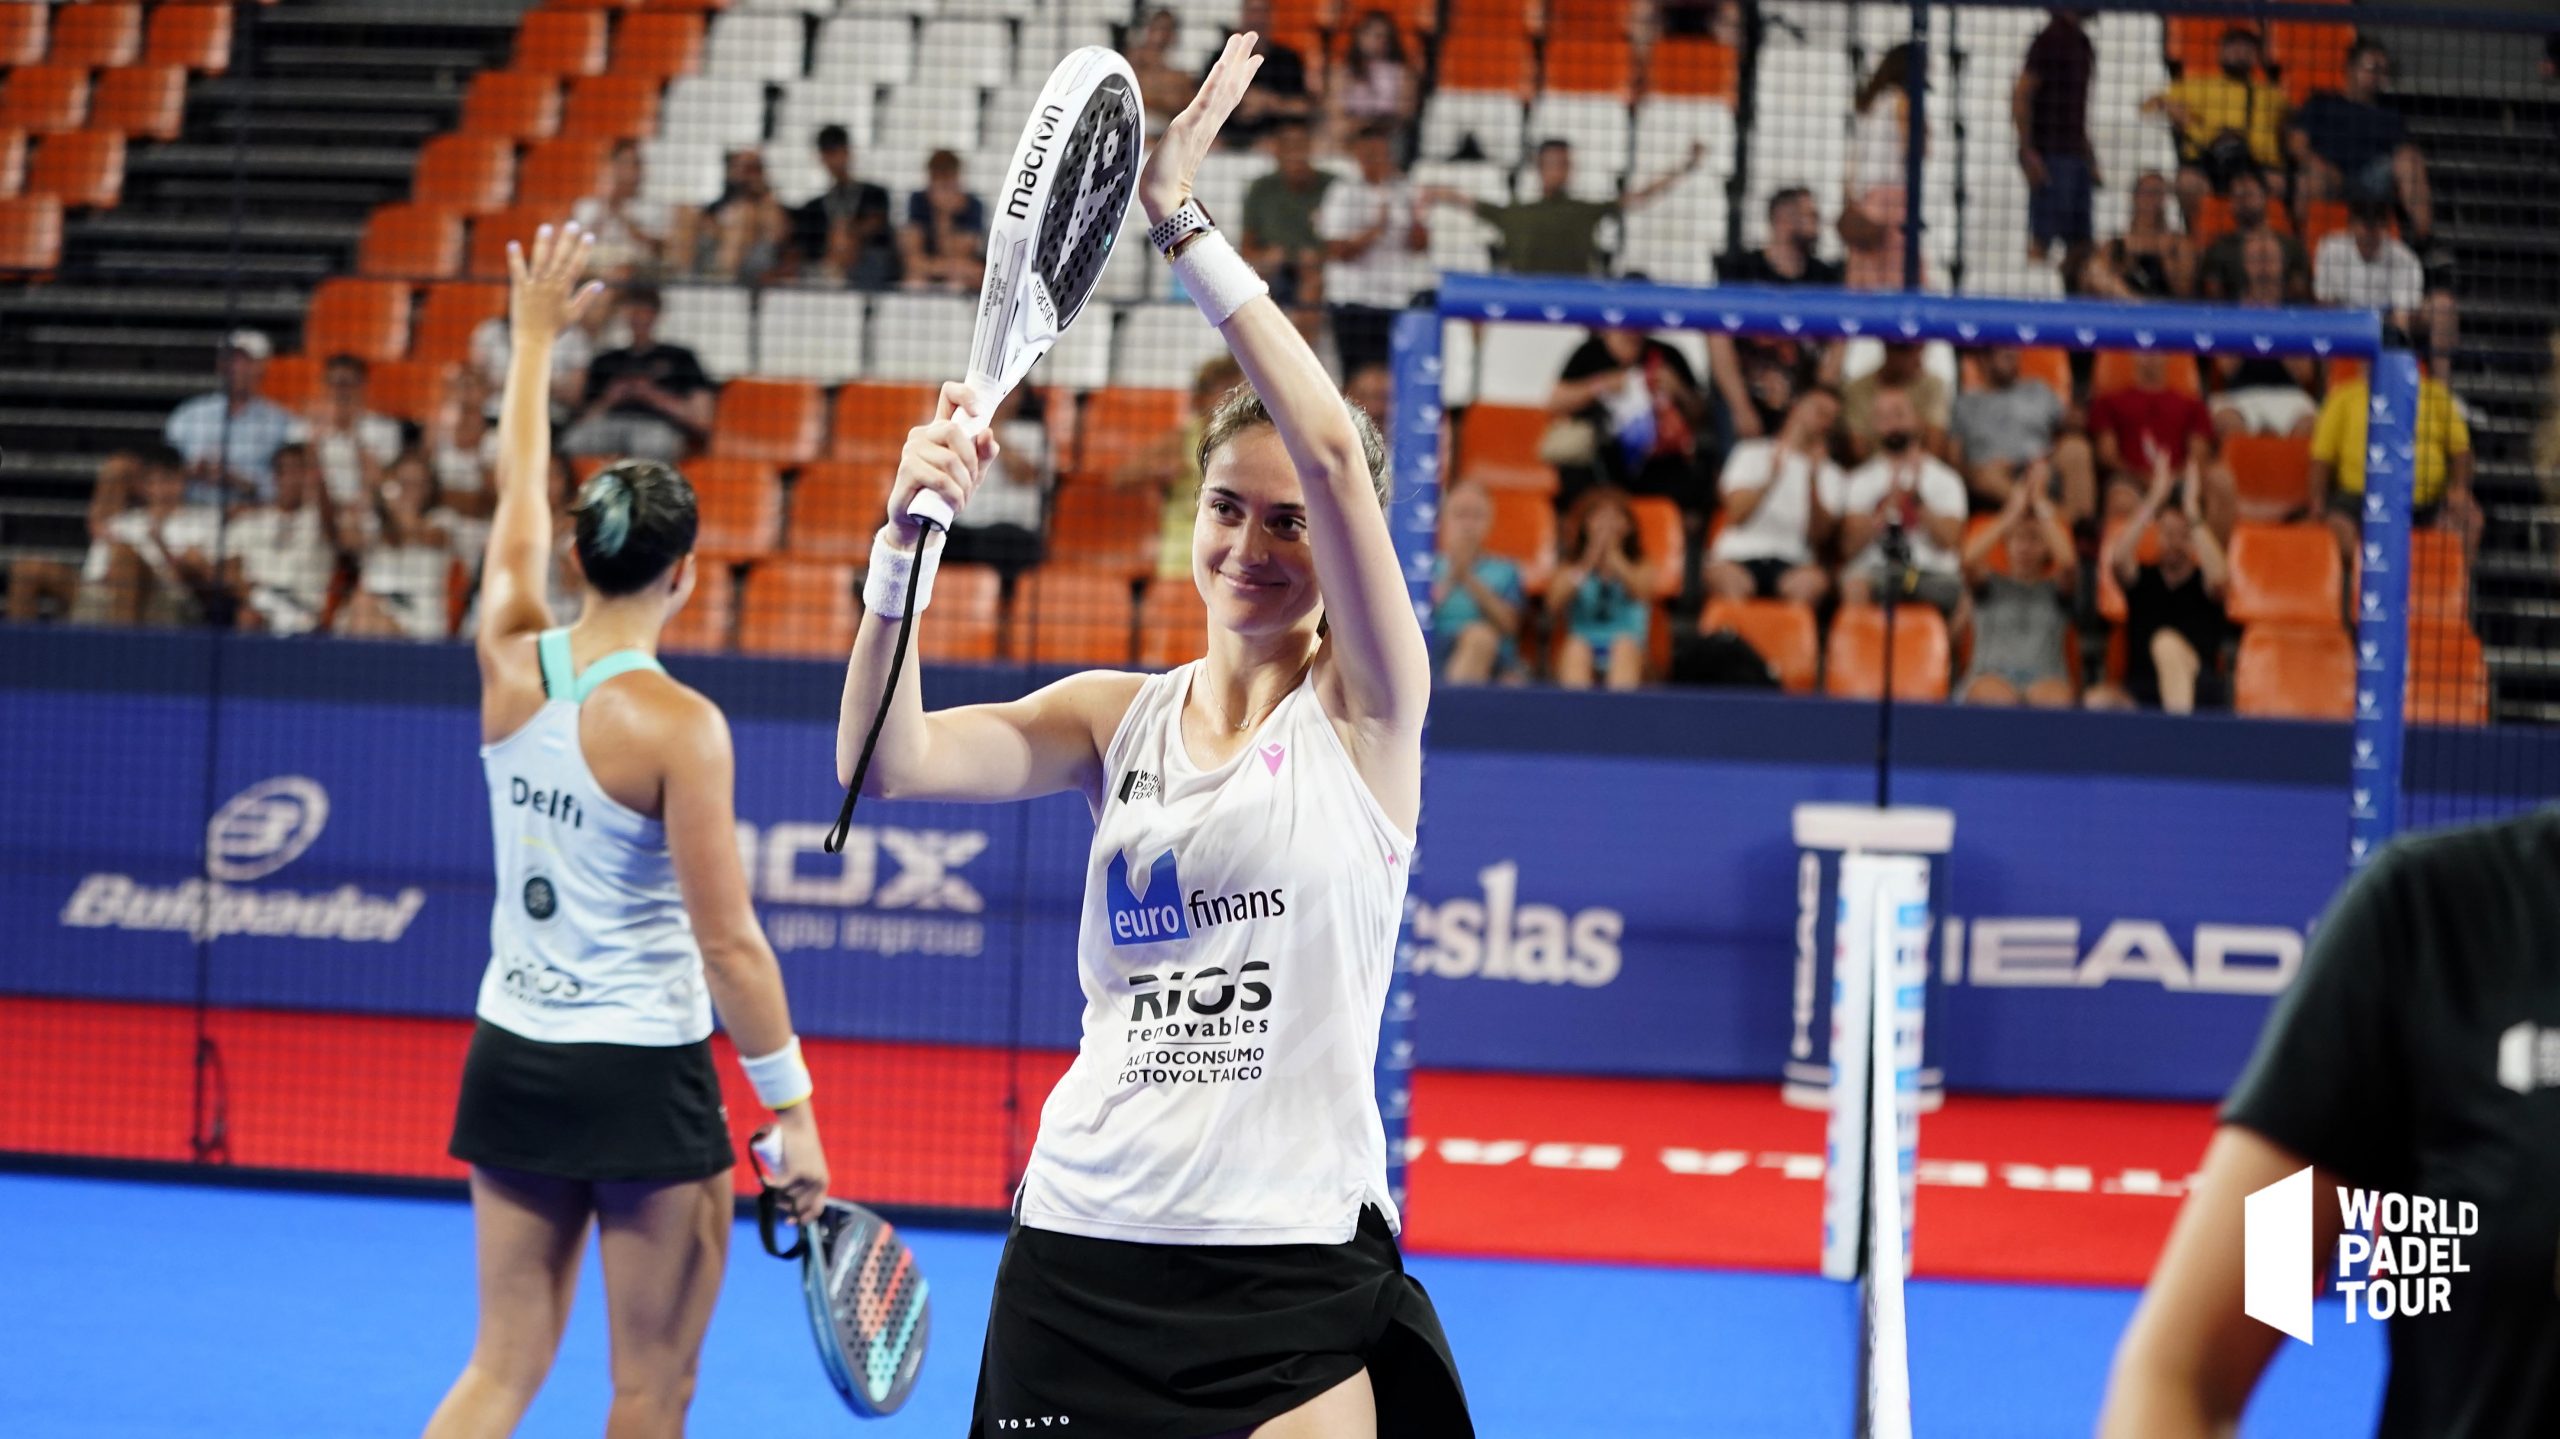 Upsets, injury and hometown heroics in Estrella Damm Valencia Open 2022 round of 32